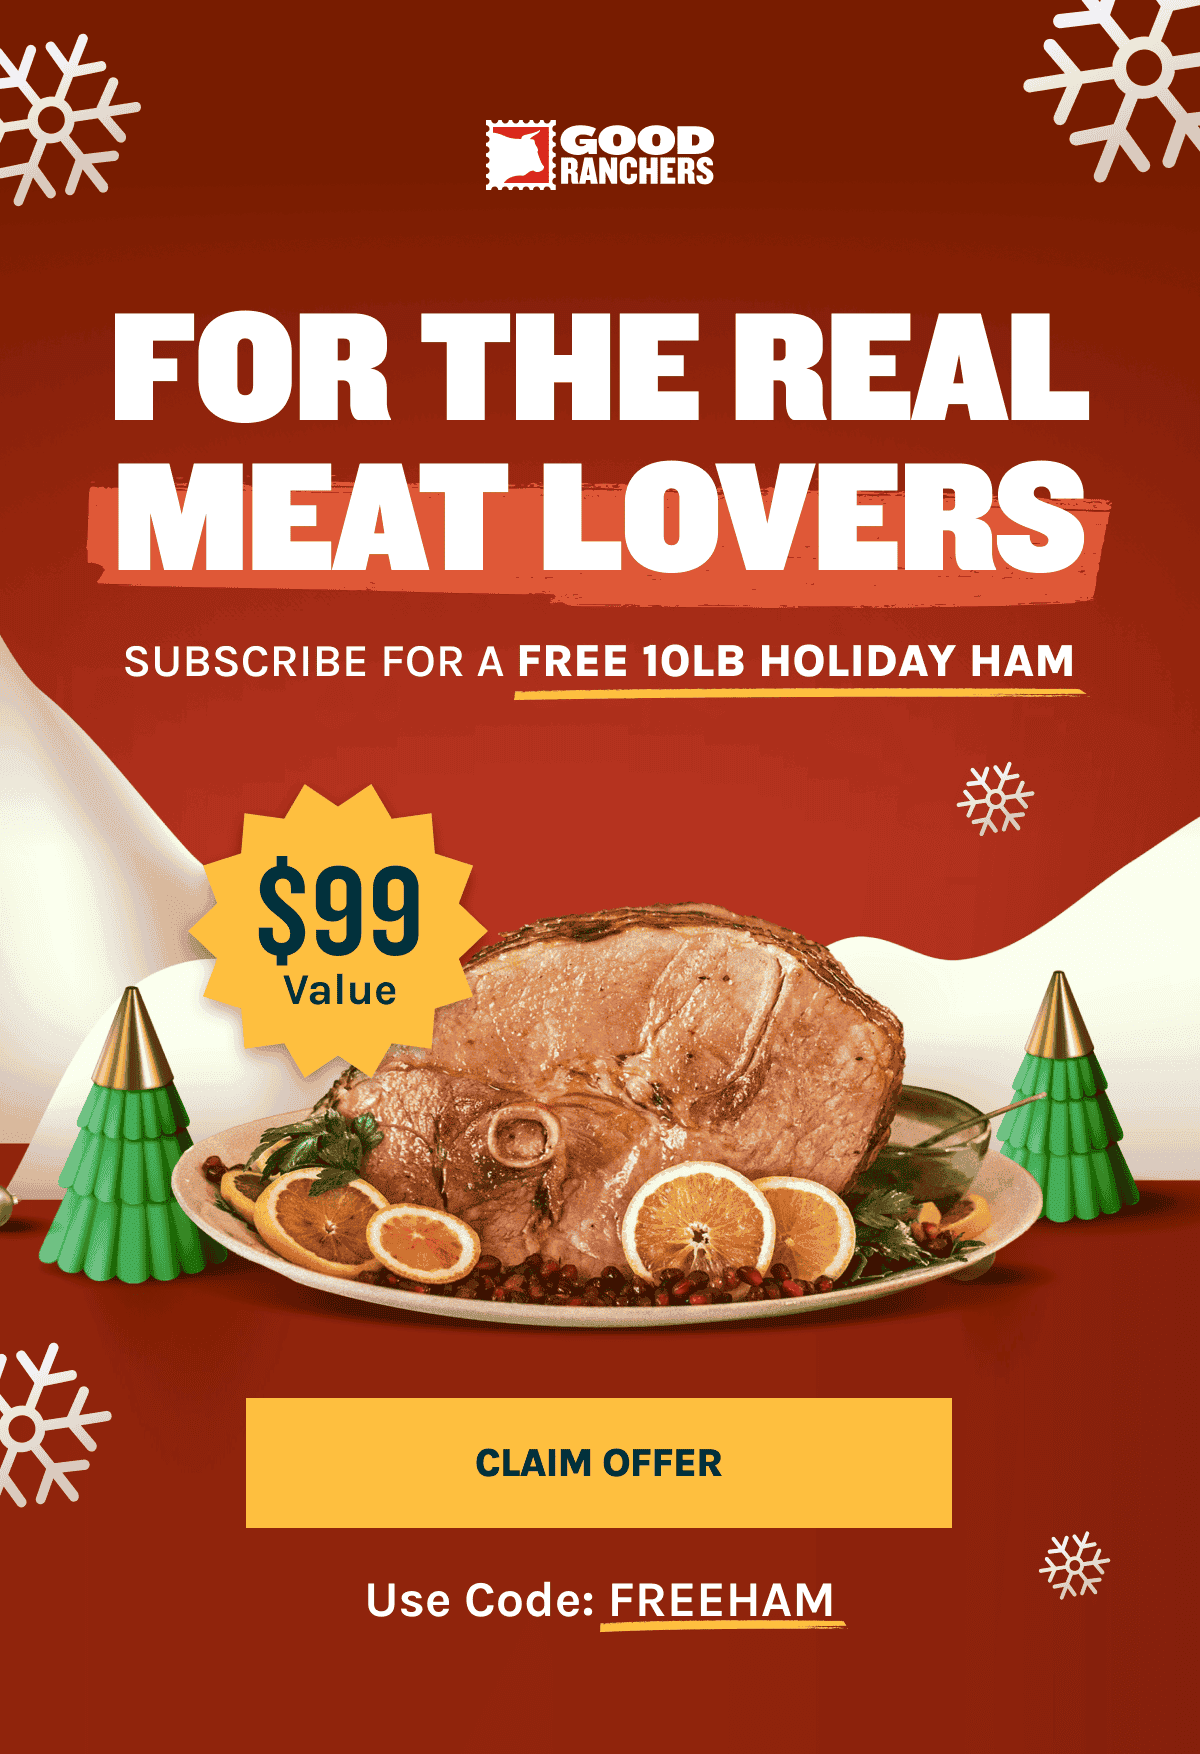 Free holiday ham with any subscription